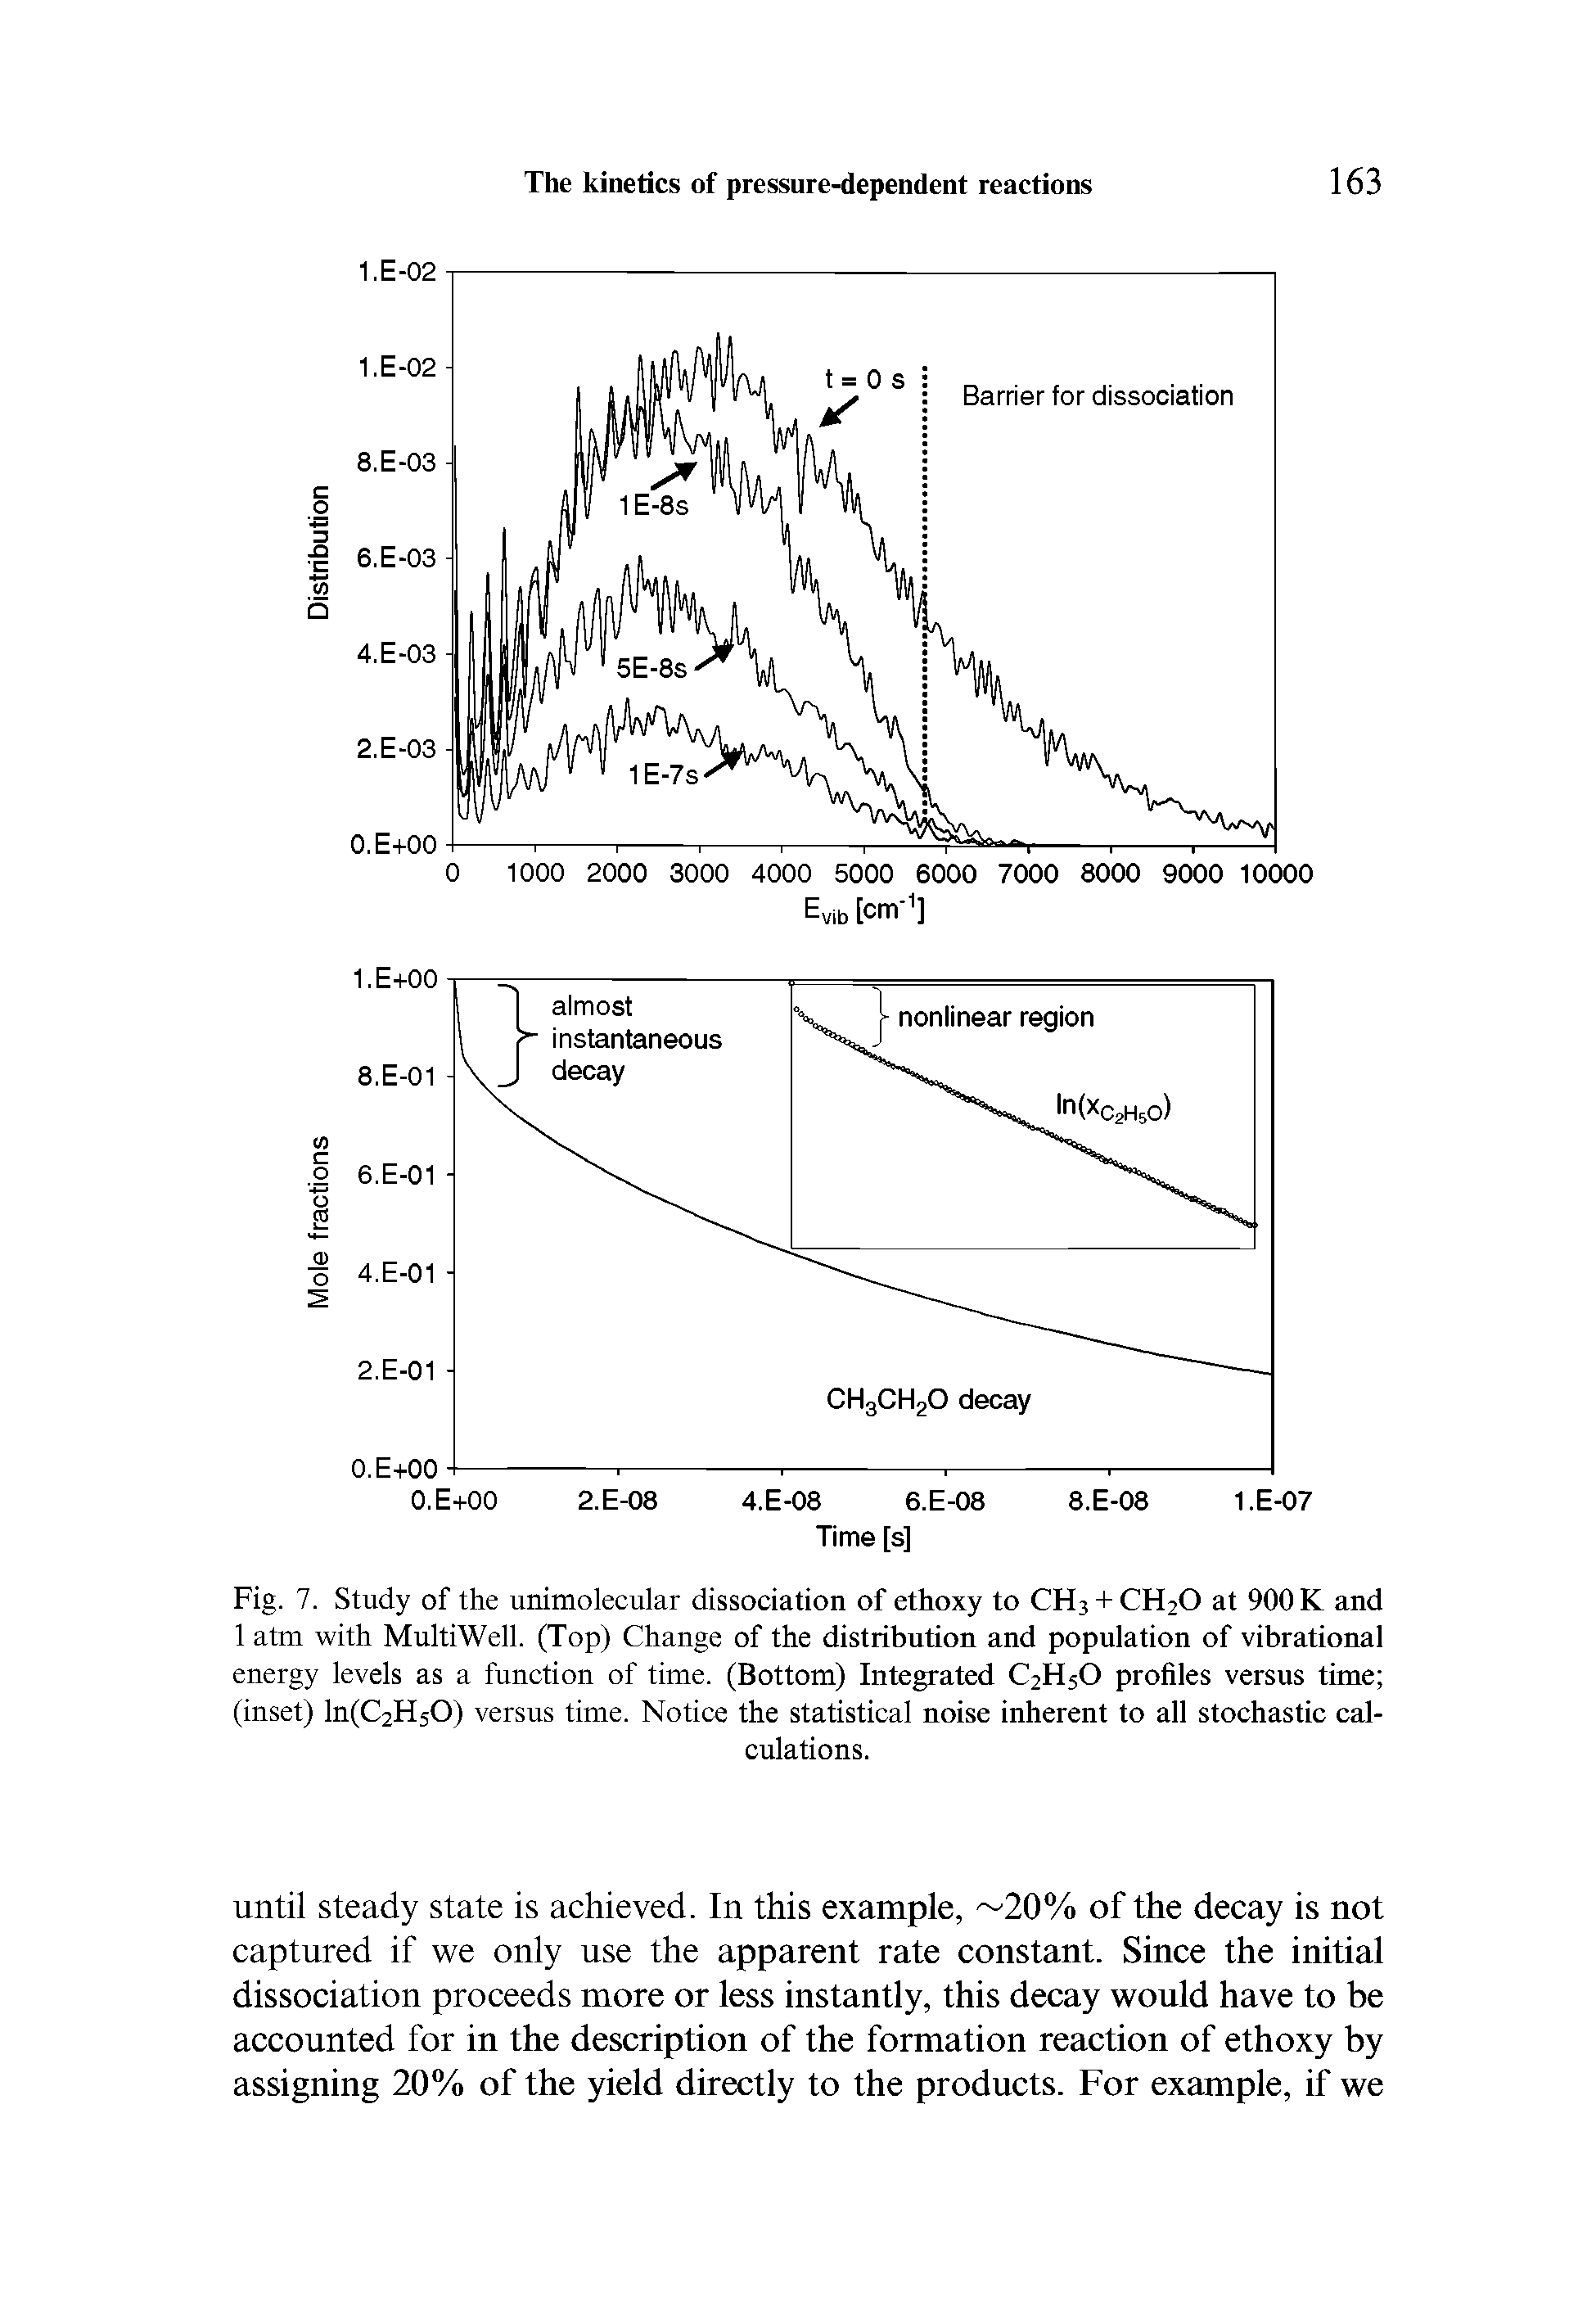 Fig. 7. Study of the unimolecular dissociation of ethoxy to CH3 + CH2O at 900 K and 1 atm with Multi Well. (Top) Change of the distribution and population of vibrational energy levels as a function of time. (Bottom) Integrated C2H5O profiles versus time (inset) ln(C2H50) versus time. Notice the statistical noise inherent to all stochastic calculations.